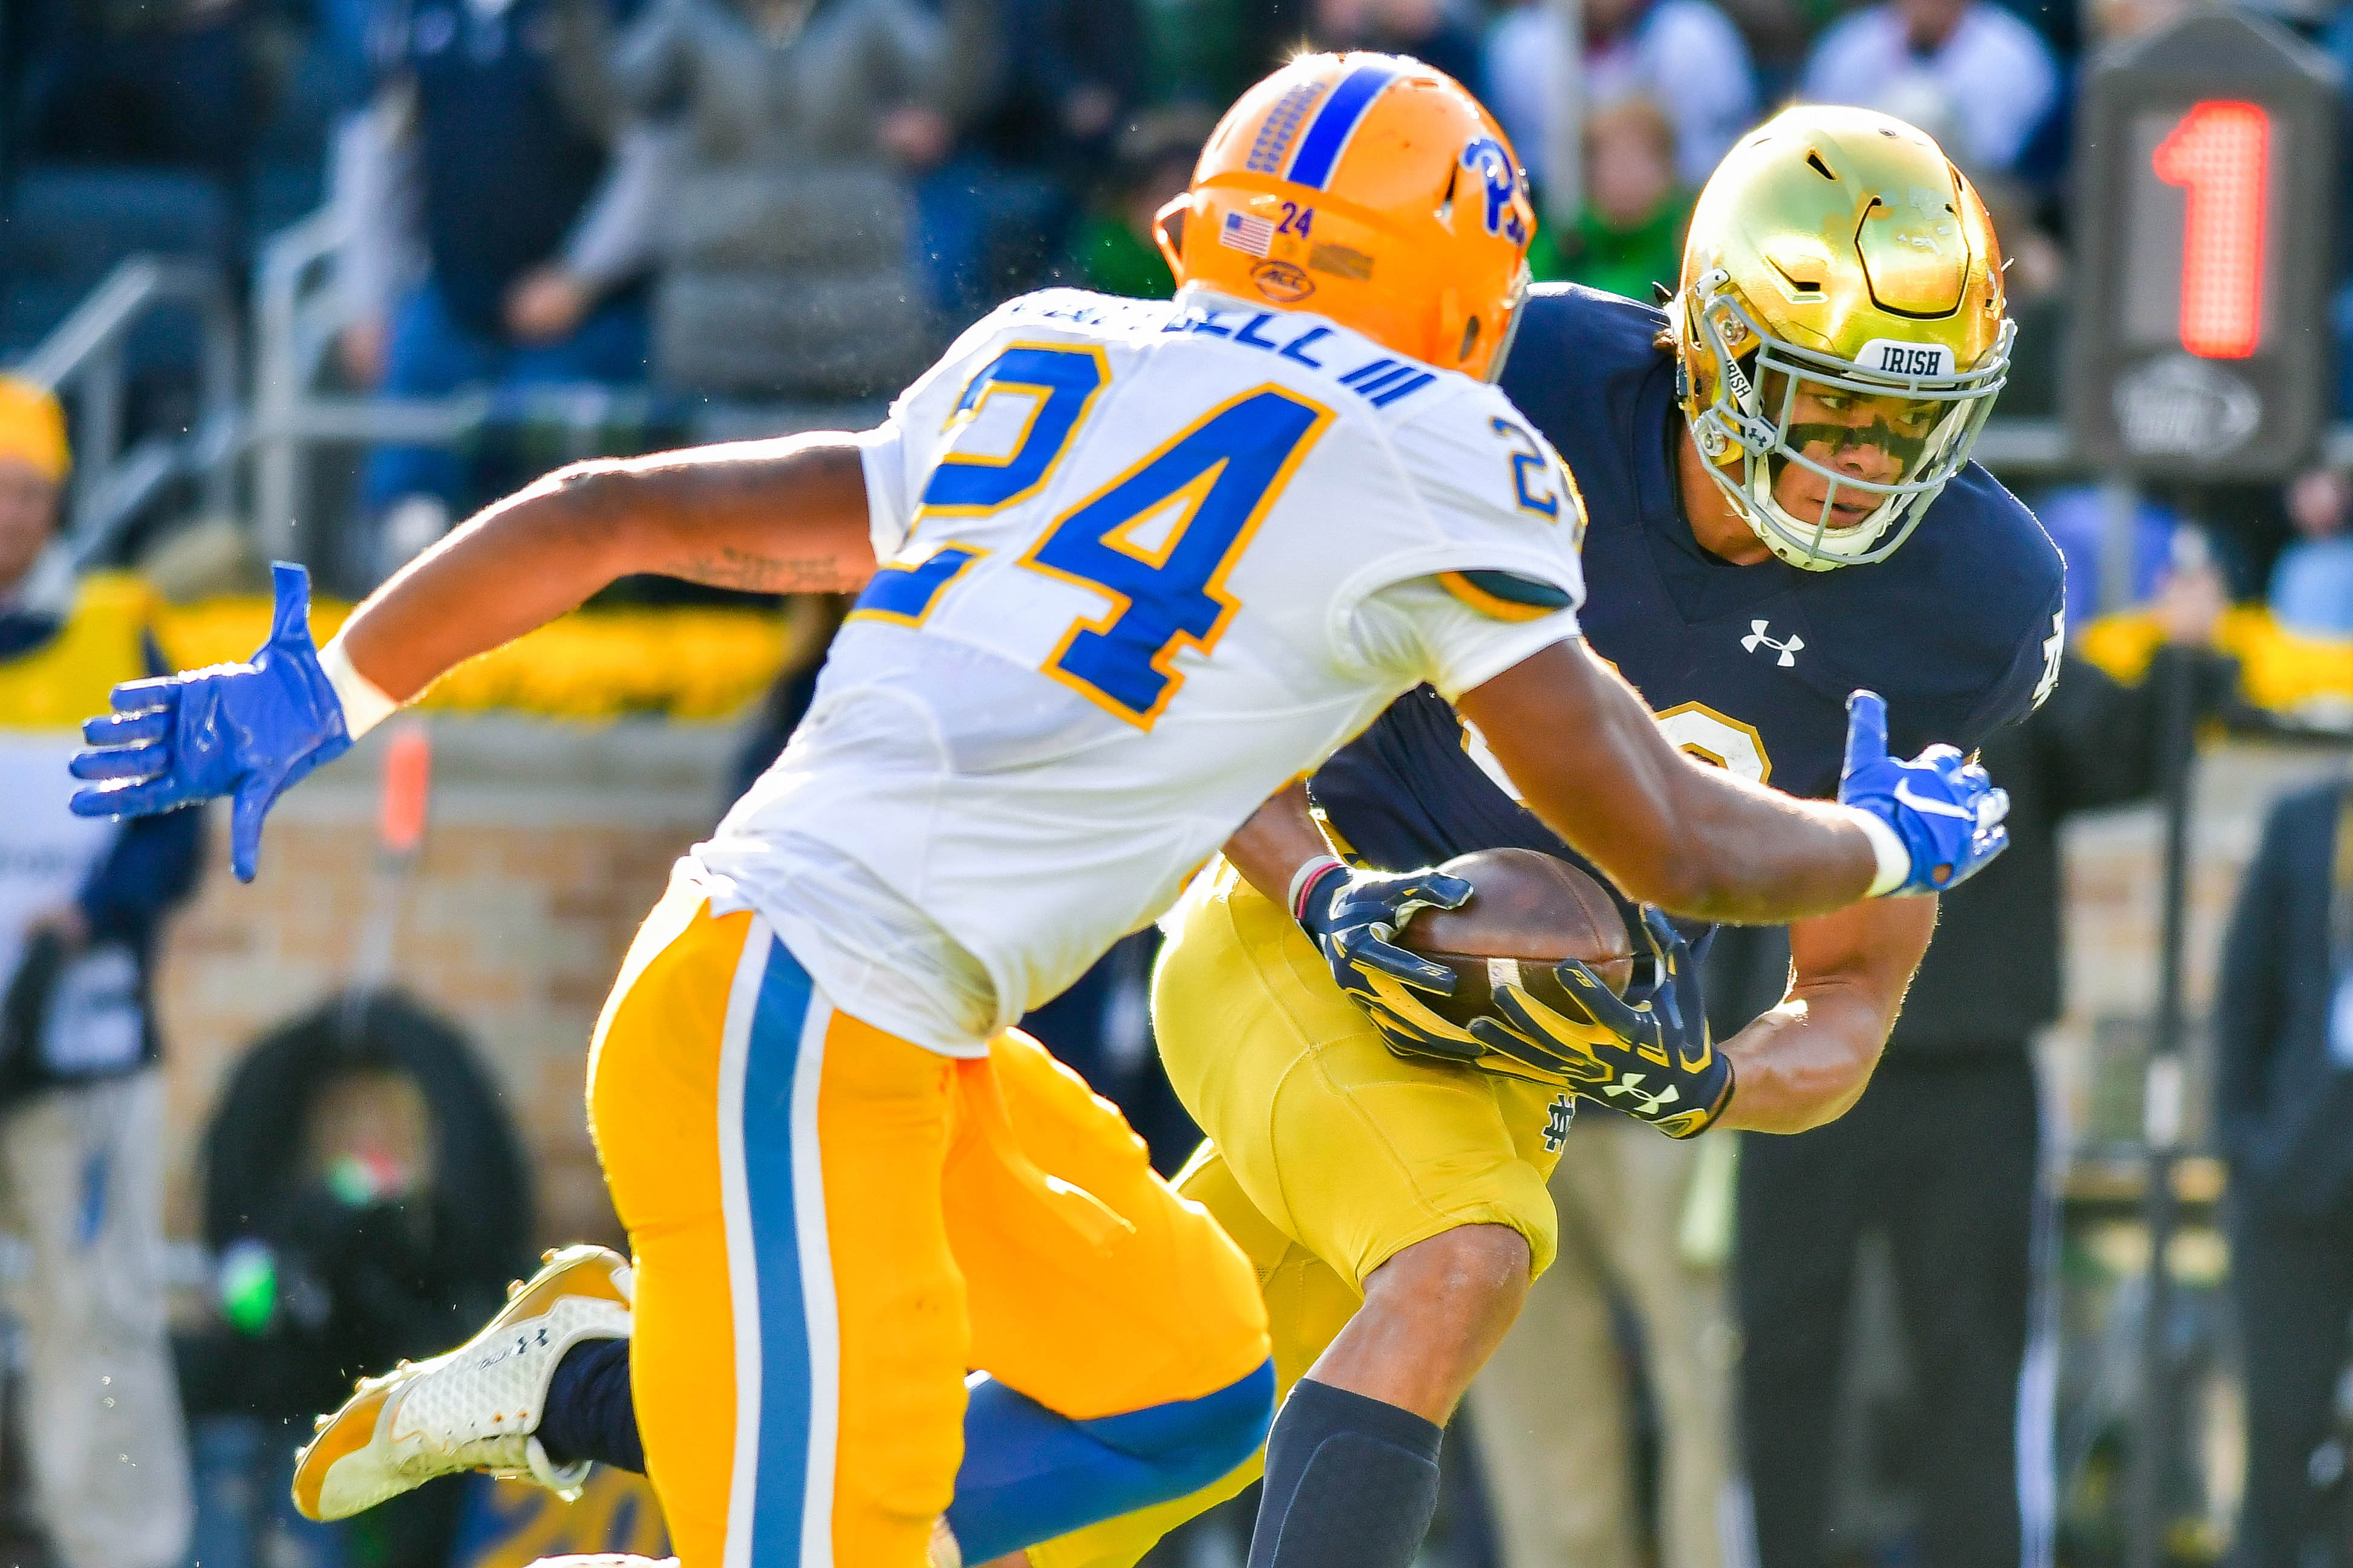 Notre Dame Projected To Play In The Orange Bowl